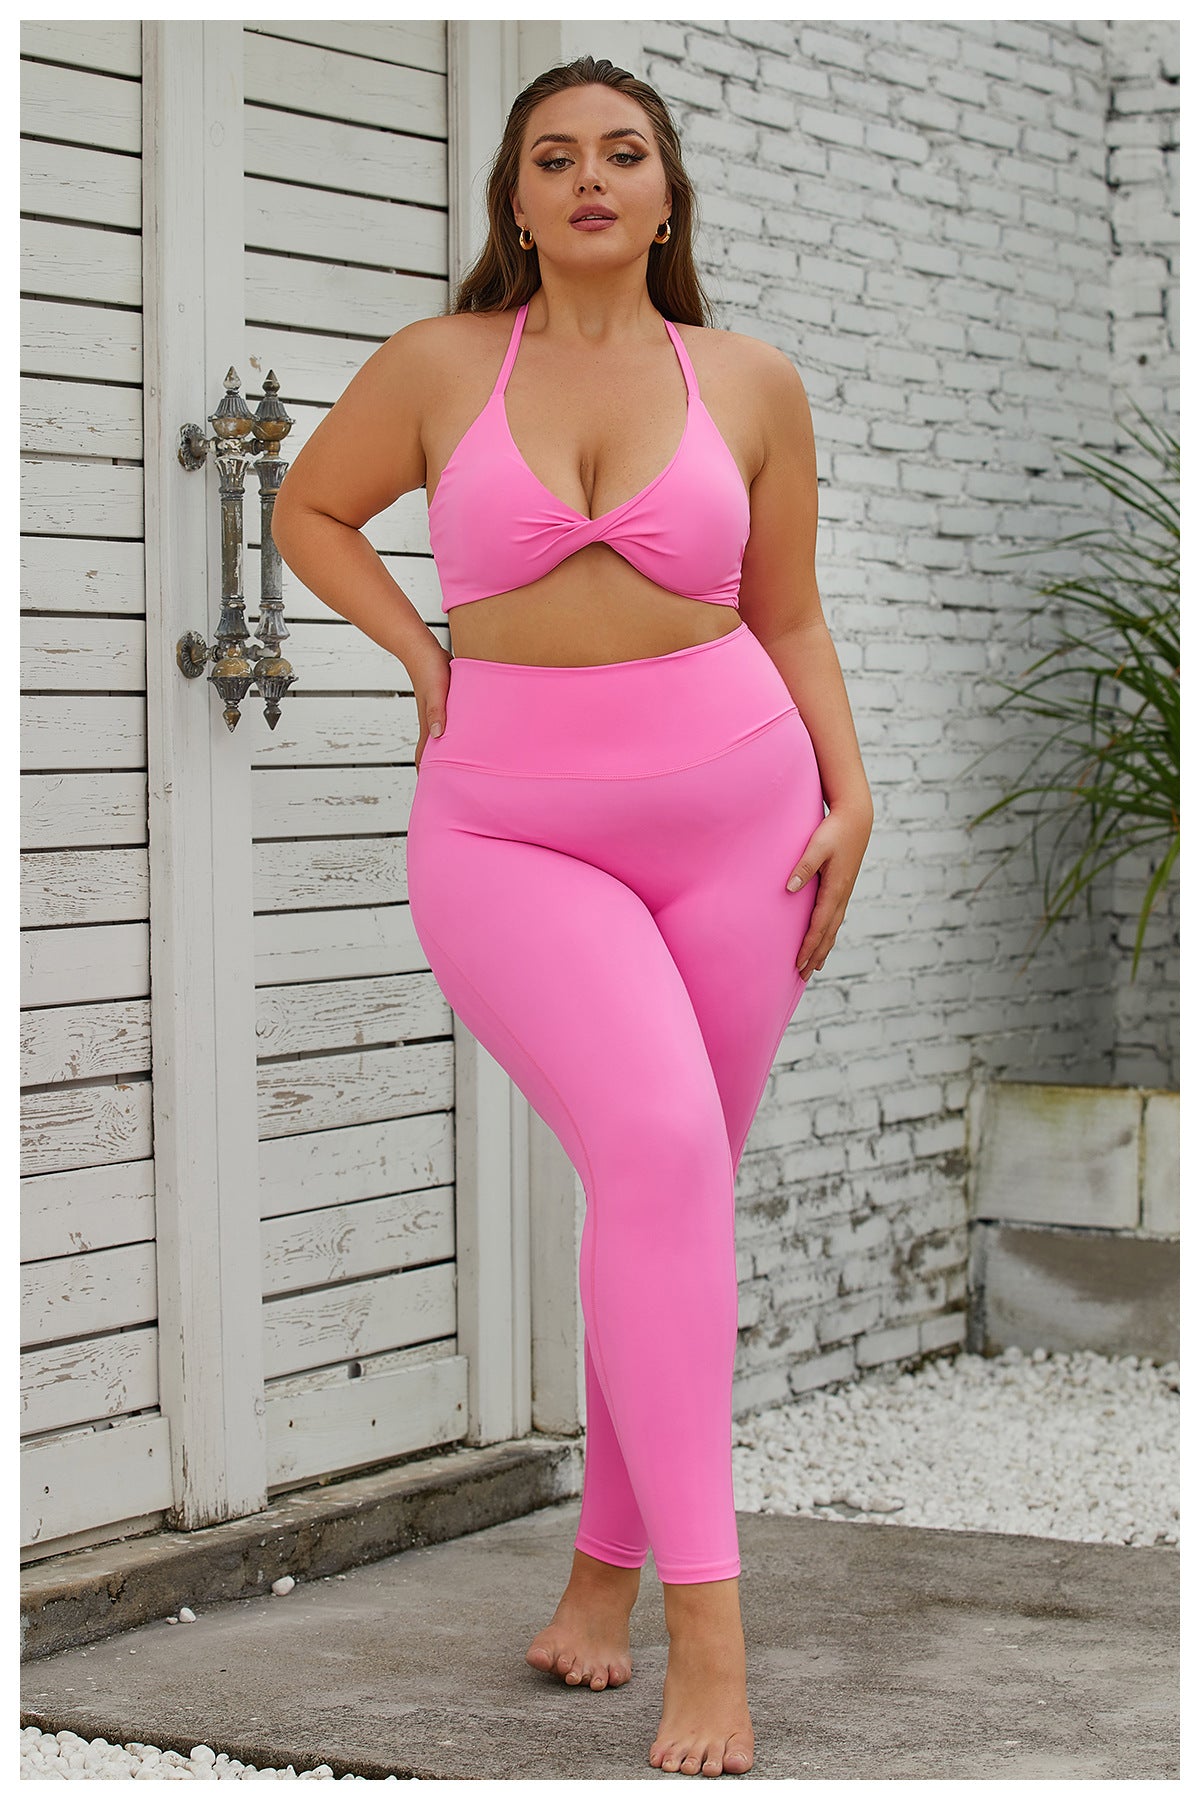 Plus Size Yoga Wear Suit Women High Top Sports Tight Nude Feel Quick-Drying Workout Clothes